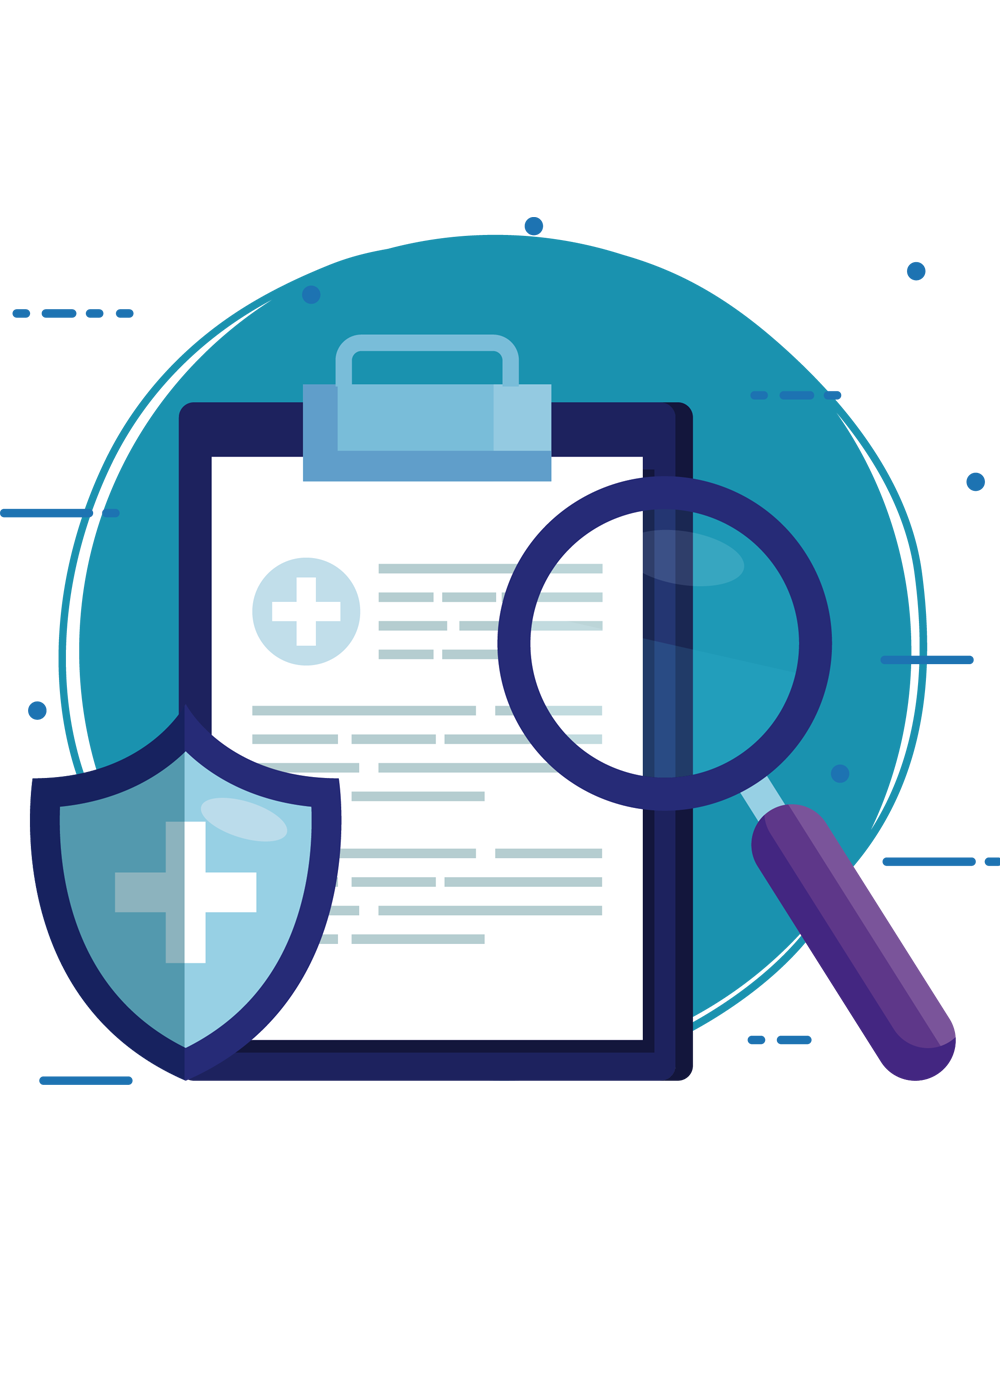 Narrative Summary Document - Medical Record, Searching medical details, Hospital Plus Symbol Shield